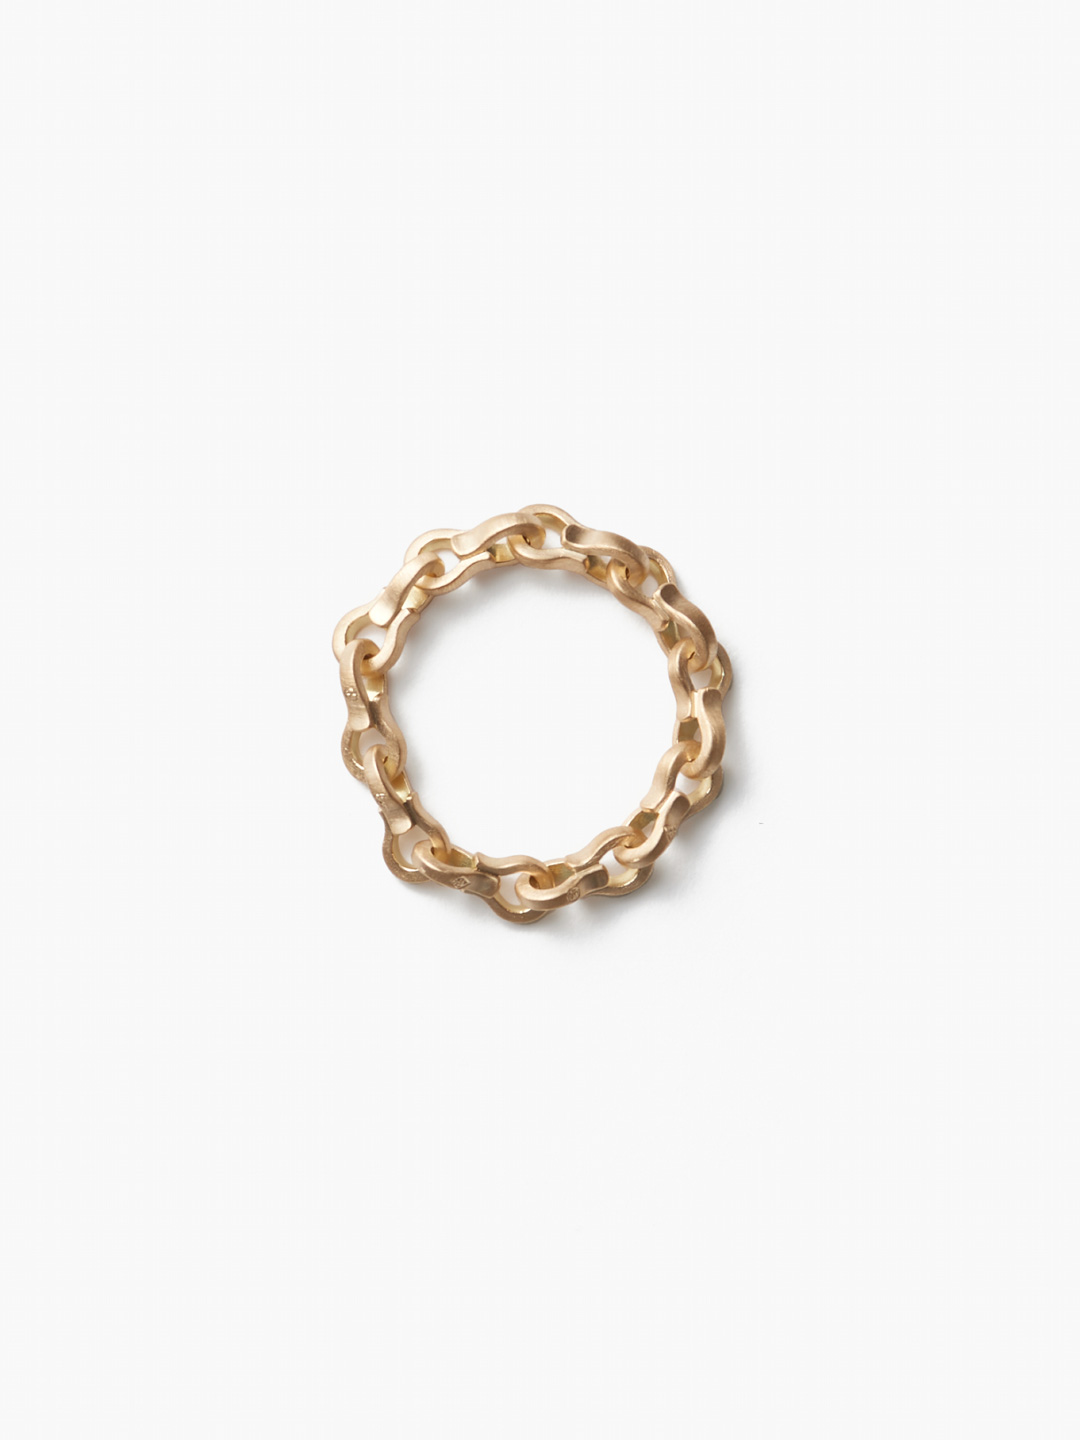 The Symbol Of Refined Metal Ring #9 #10 - Yellow Gold